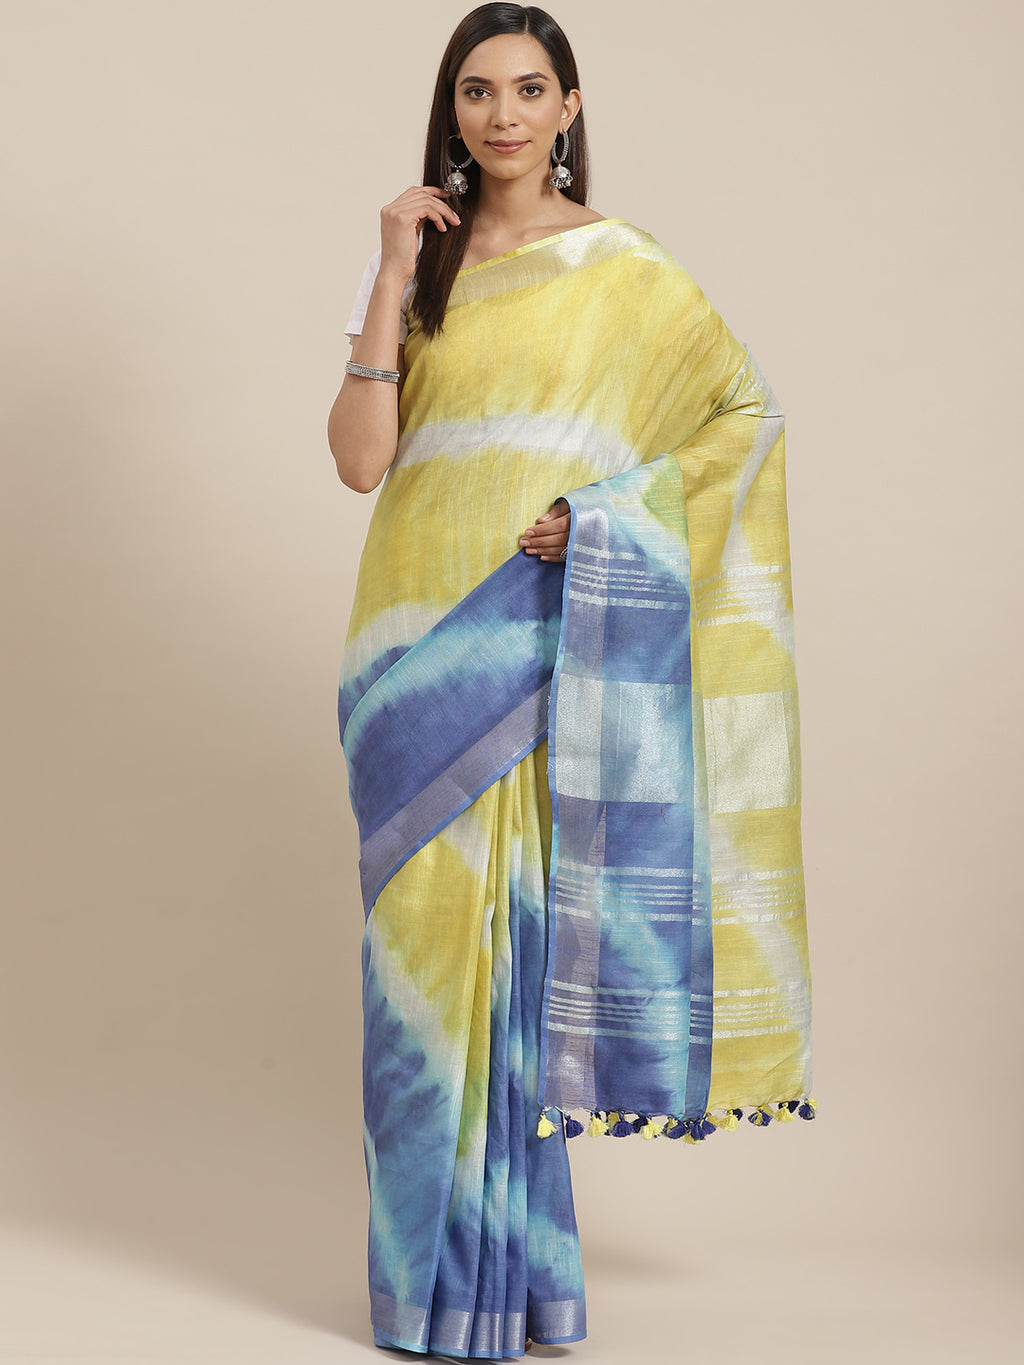 Yellow and Blue, Kalakari India Linen Shibori Woven Saree and Blouse ALBGSA0060-Saree-Kalakari India-ALBGSA0060-Cotton, Geographical Indication, Hand Crafted, Heritage Prints, Linen, Natural Dyes, Red, Sarees, Shibori, Sustainable Fabrics, Woven, Yellow-[Linen,Ethnic,wear,Fashionista,Handloom,Handicraft,Indigo,blockprint,block,print,Cotton,Chanderi,Blue, latest,classy,party,bollywood,trendy,summer,style,traditional,formal,elegant,unique,style,hand,block,print, dabu,booti,gift,present,glamorous,a